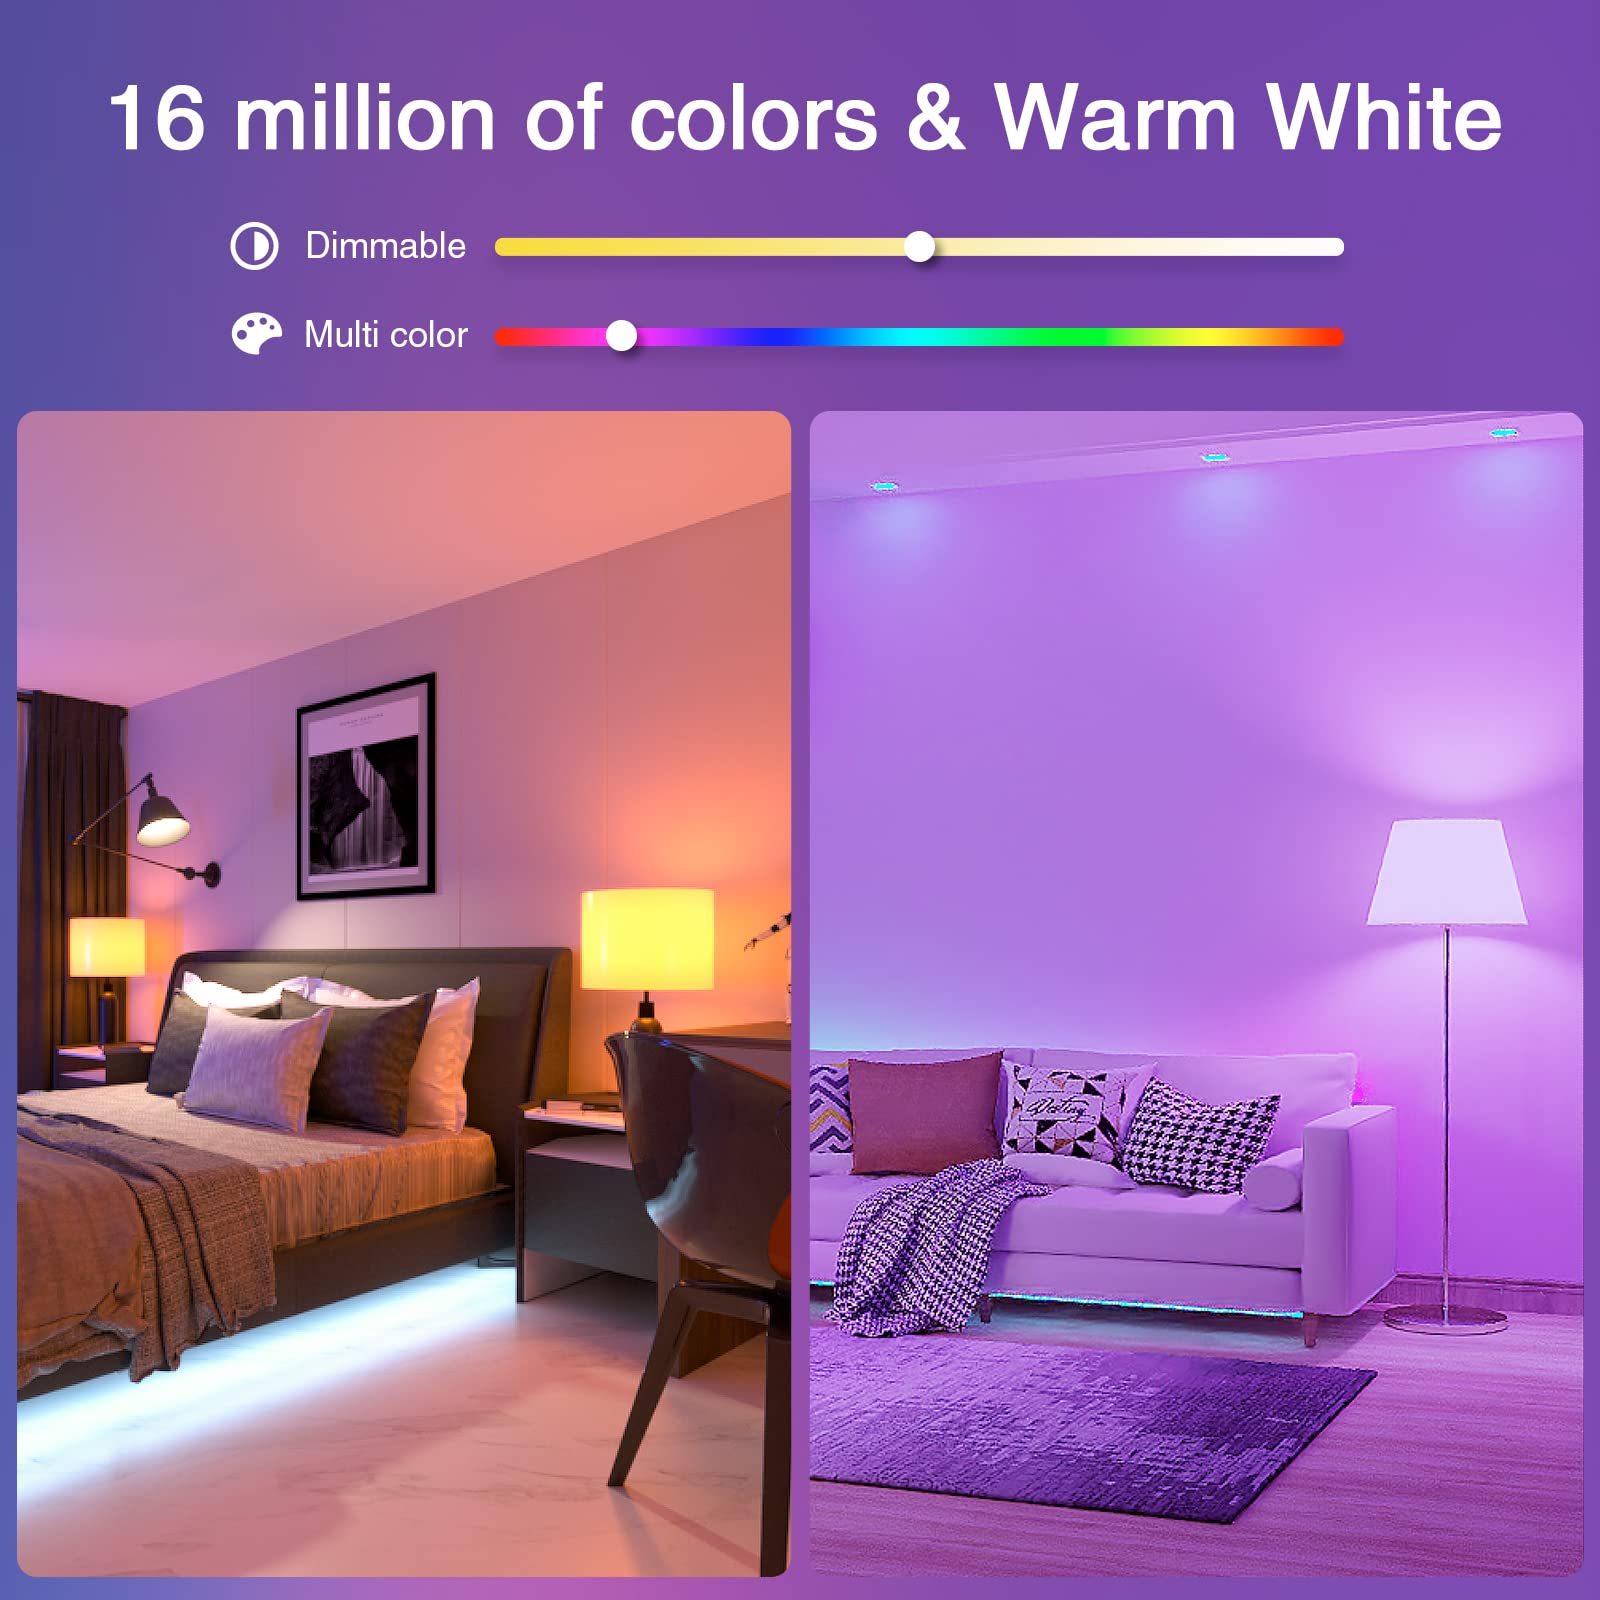 Ghome Smart Light Bulbs, A19 E26 Color Changing Led Bulb Works with Alexa, Google Home, App & Voice Control, 2.4Ghz WiFi Only, 800 Lumens,Dimmable RGB Warm White 2700K Smart Home Lighting, 4 Pack(WB4)